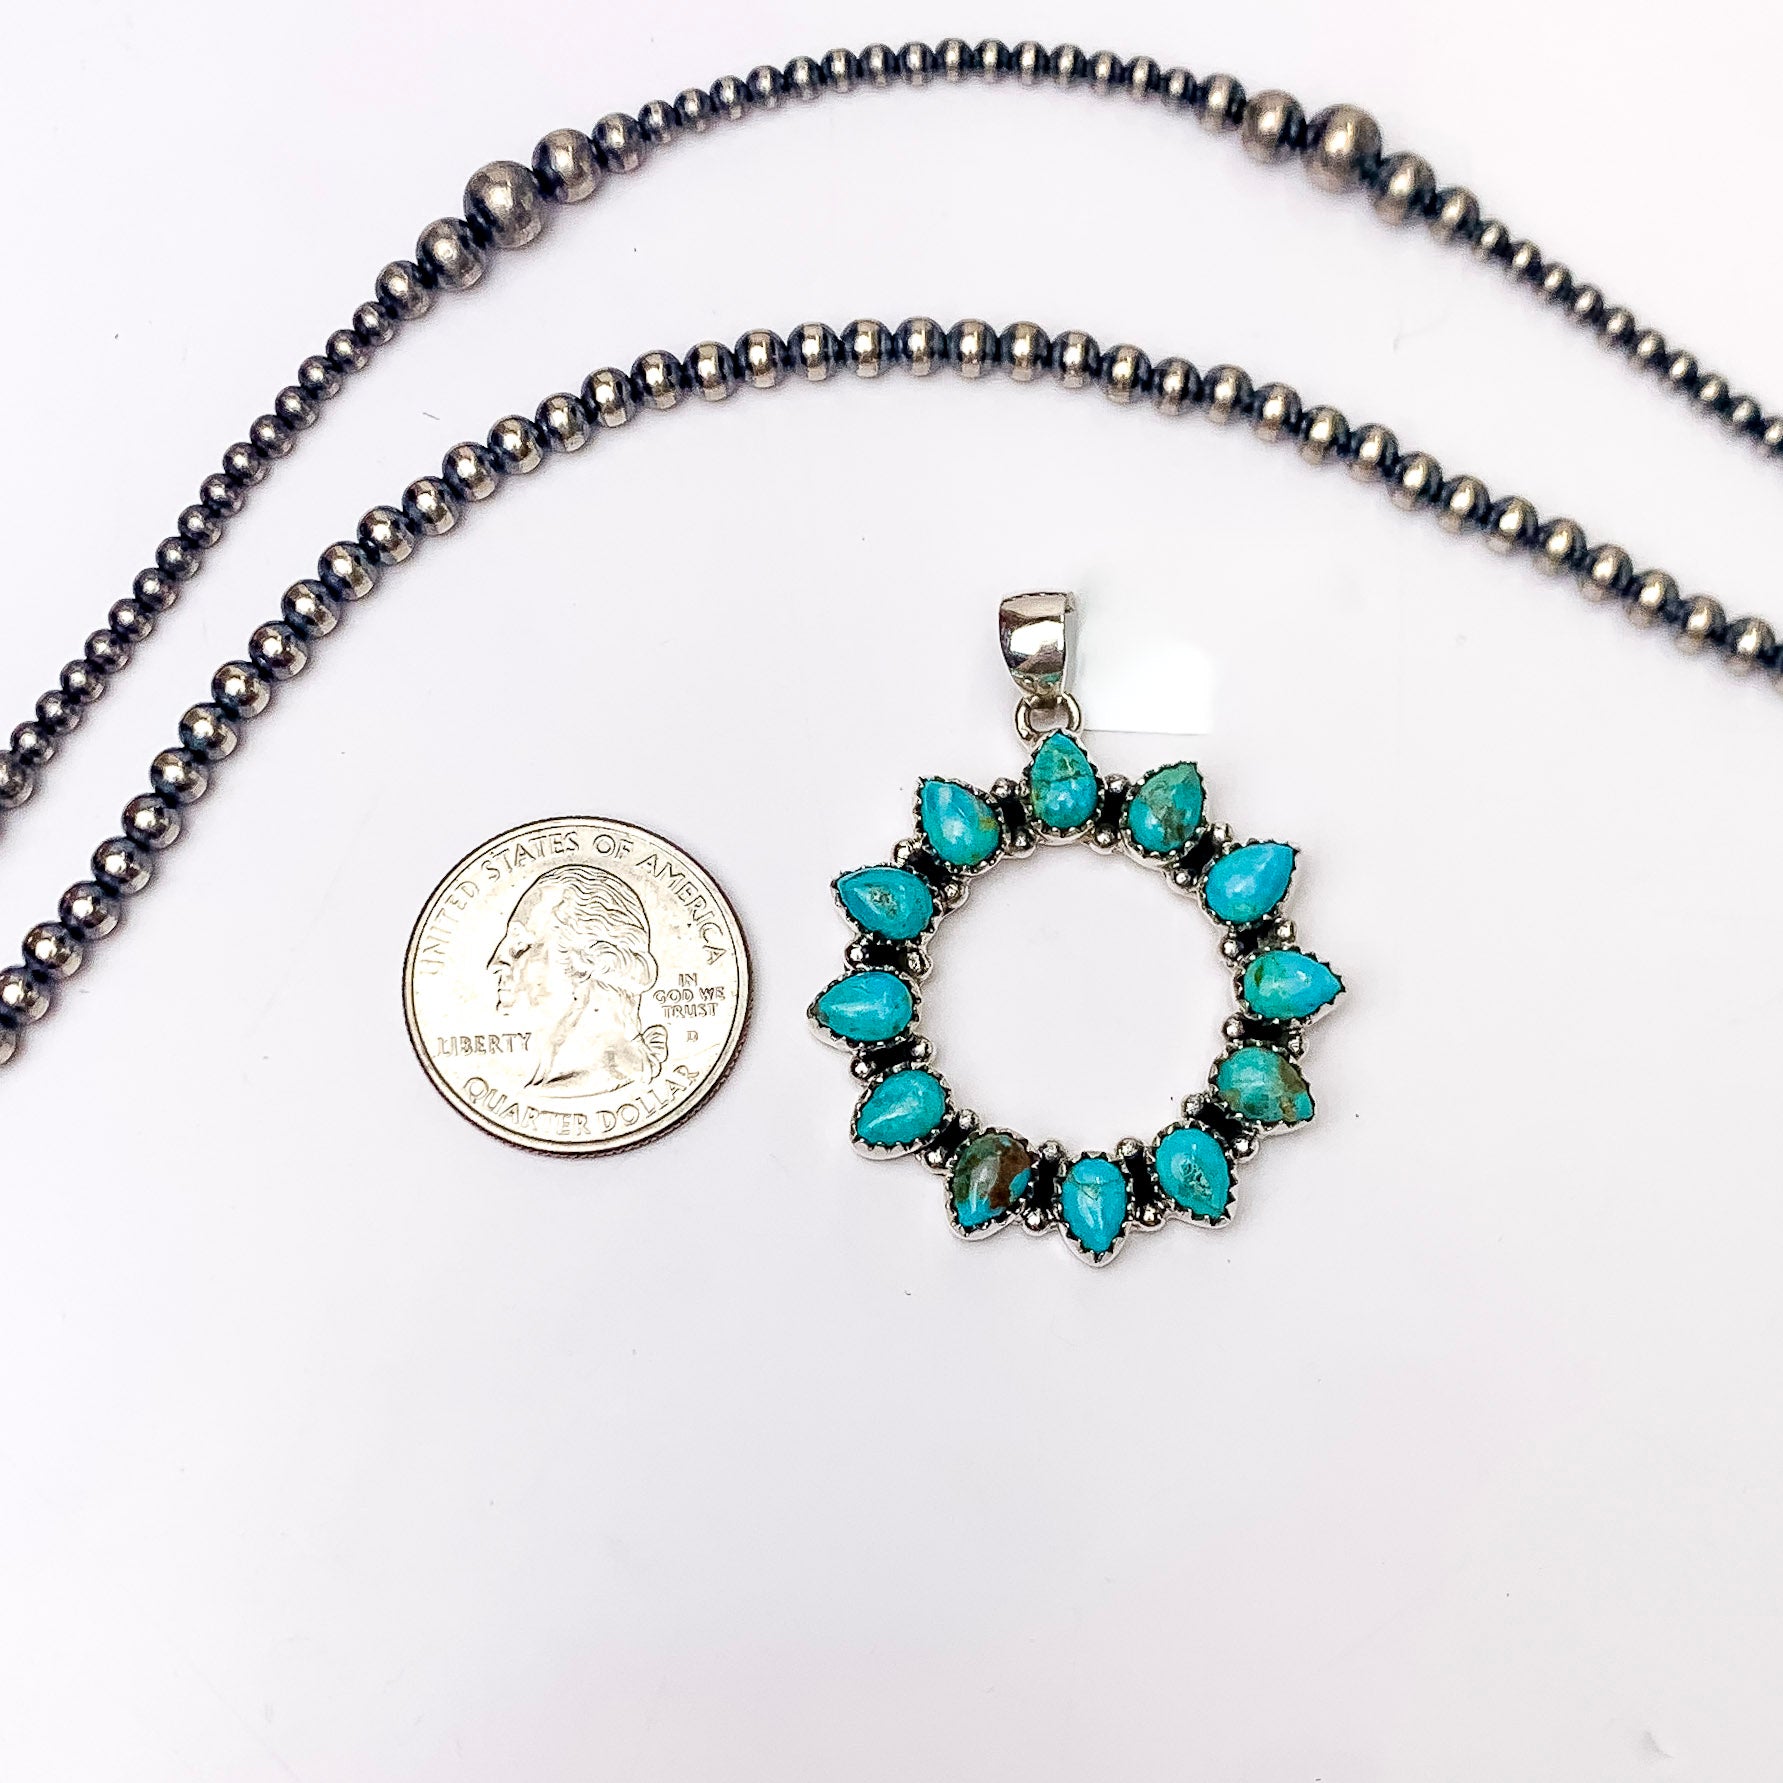 In the picture is a  handmade round pendant includes genuine sterling silver and genuine kingman turquoise stones with a white background